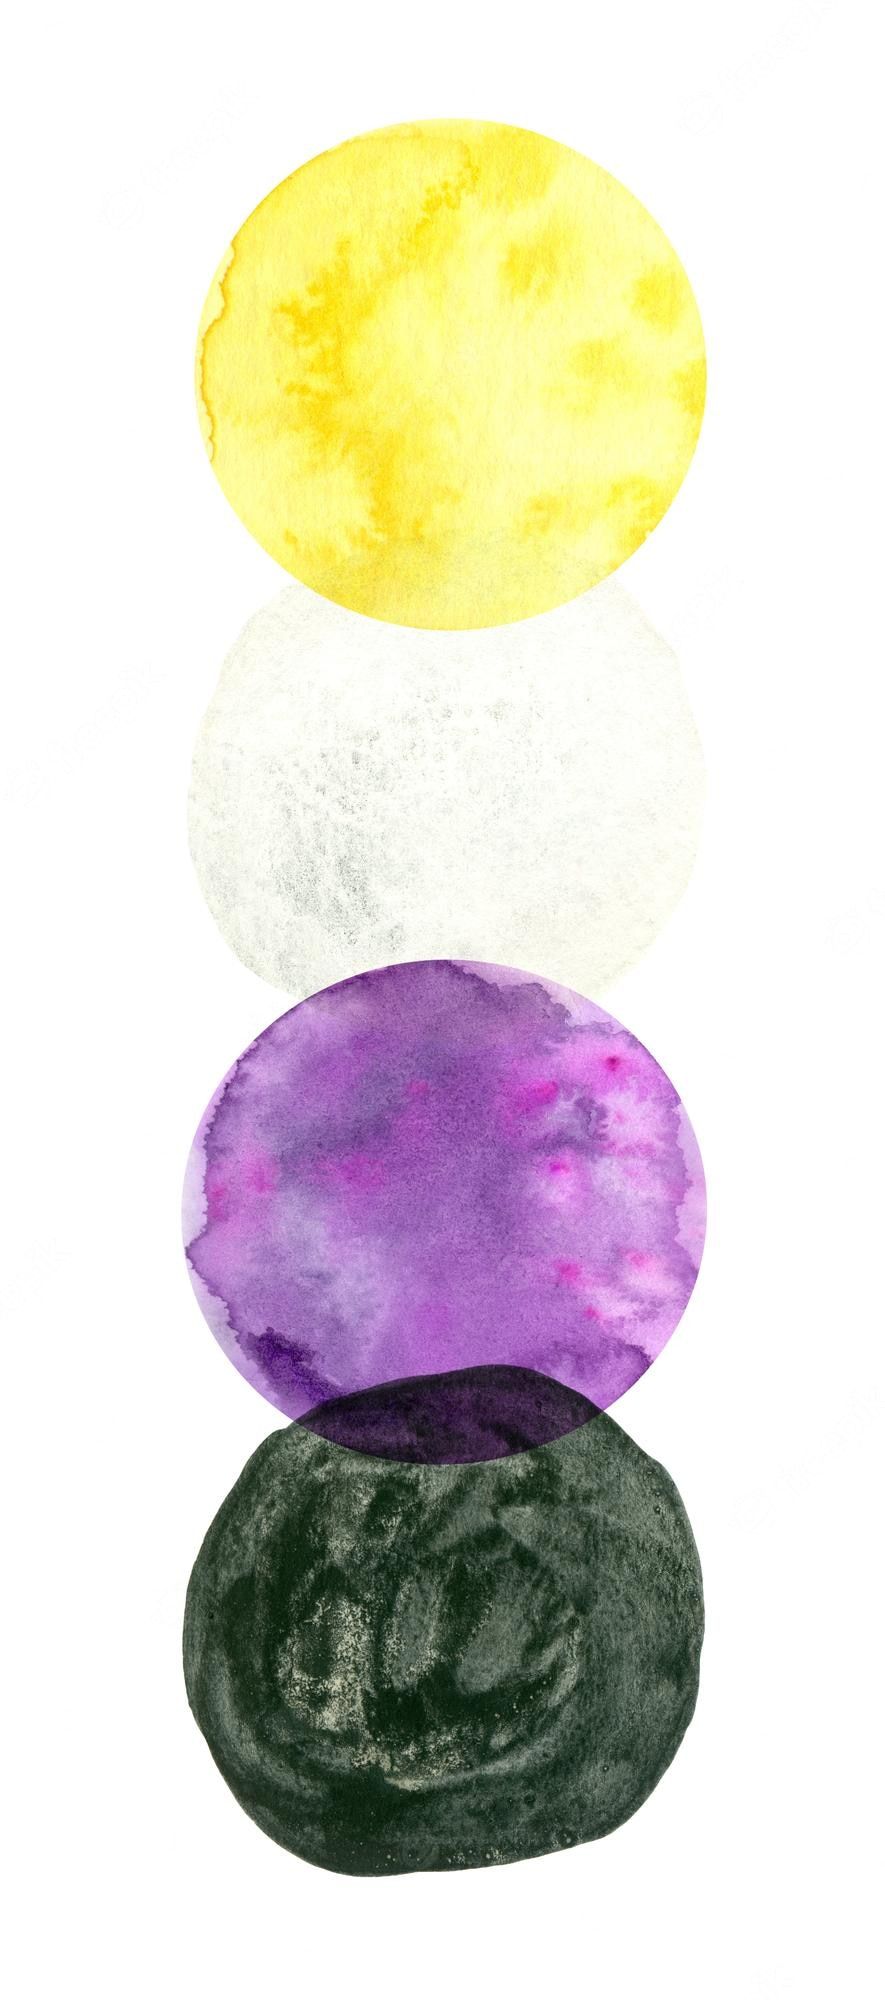 Watercolor painting of four circles in yellow, white, purple, and black. - Non binary